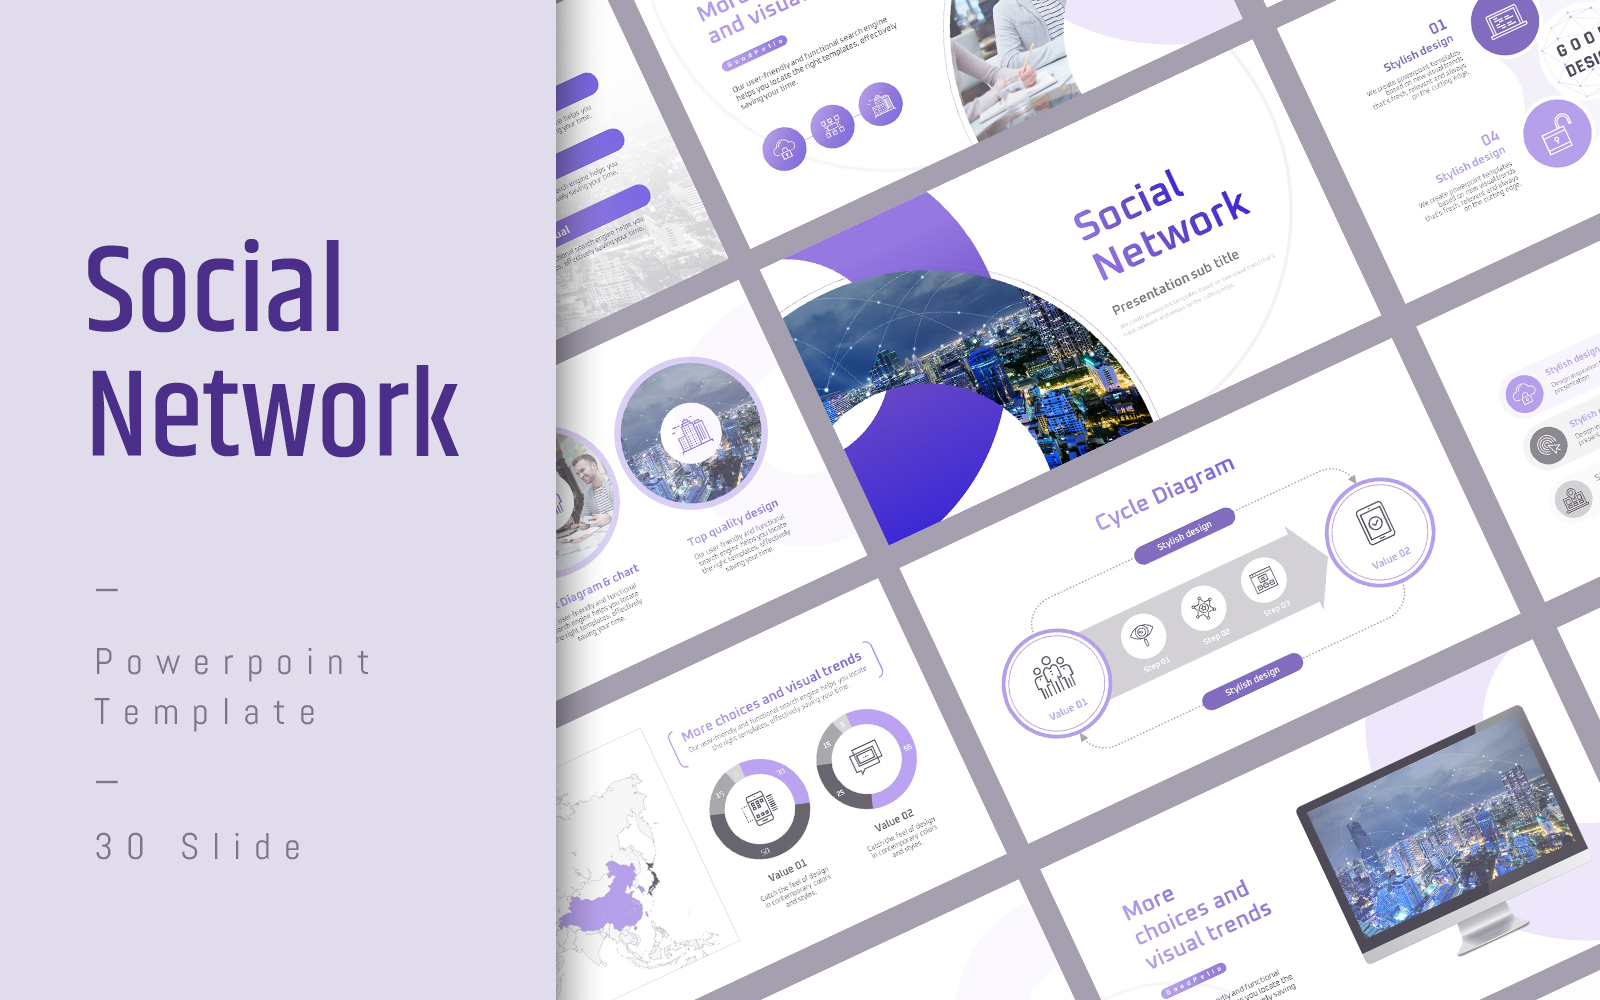 Social Network PPT Template